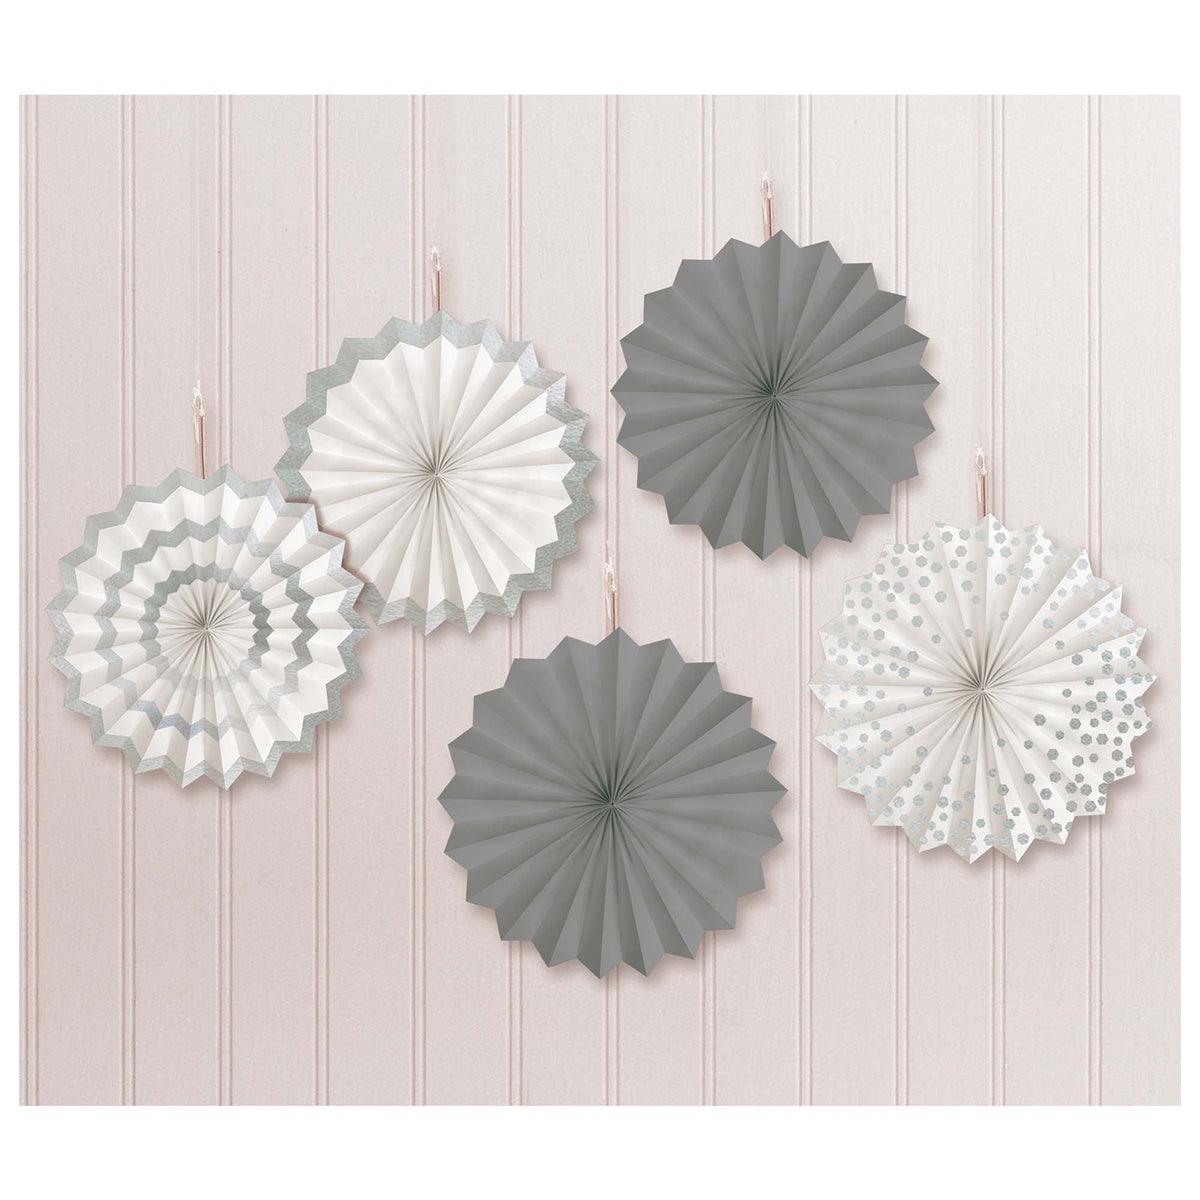 Silver 5 pack of 5" Paper Fans